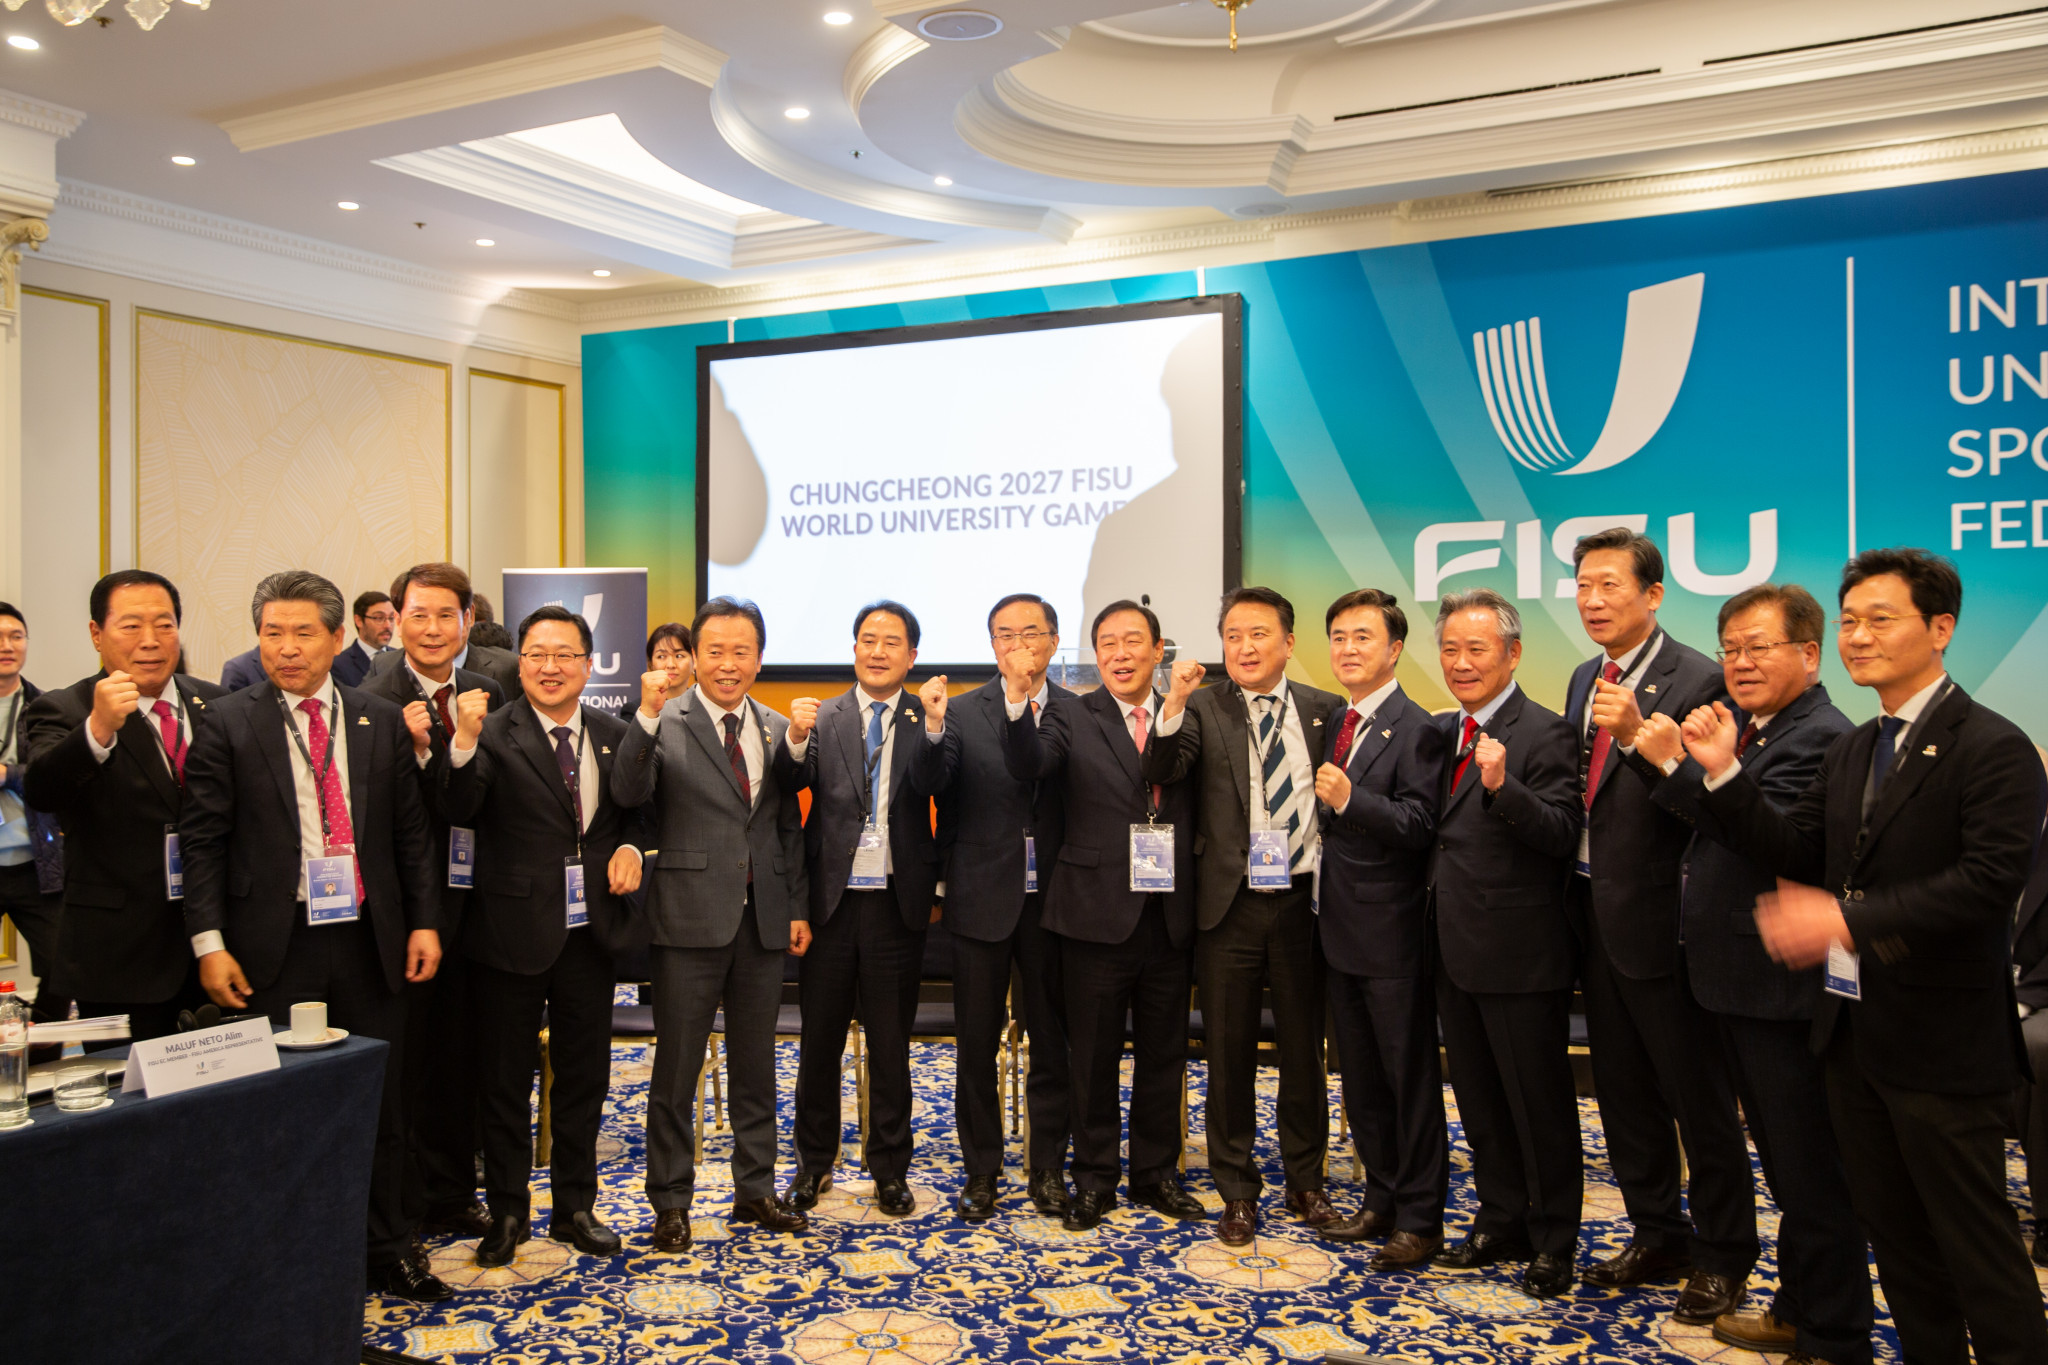 Chungcheong staved off competition from North Carolina to be awarded the 2027 FISU Games  ©FISU